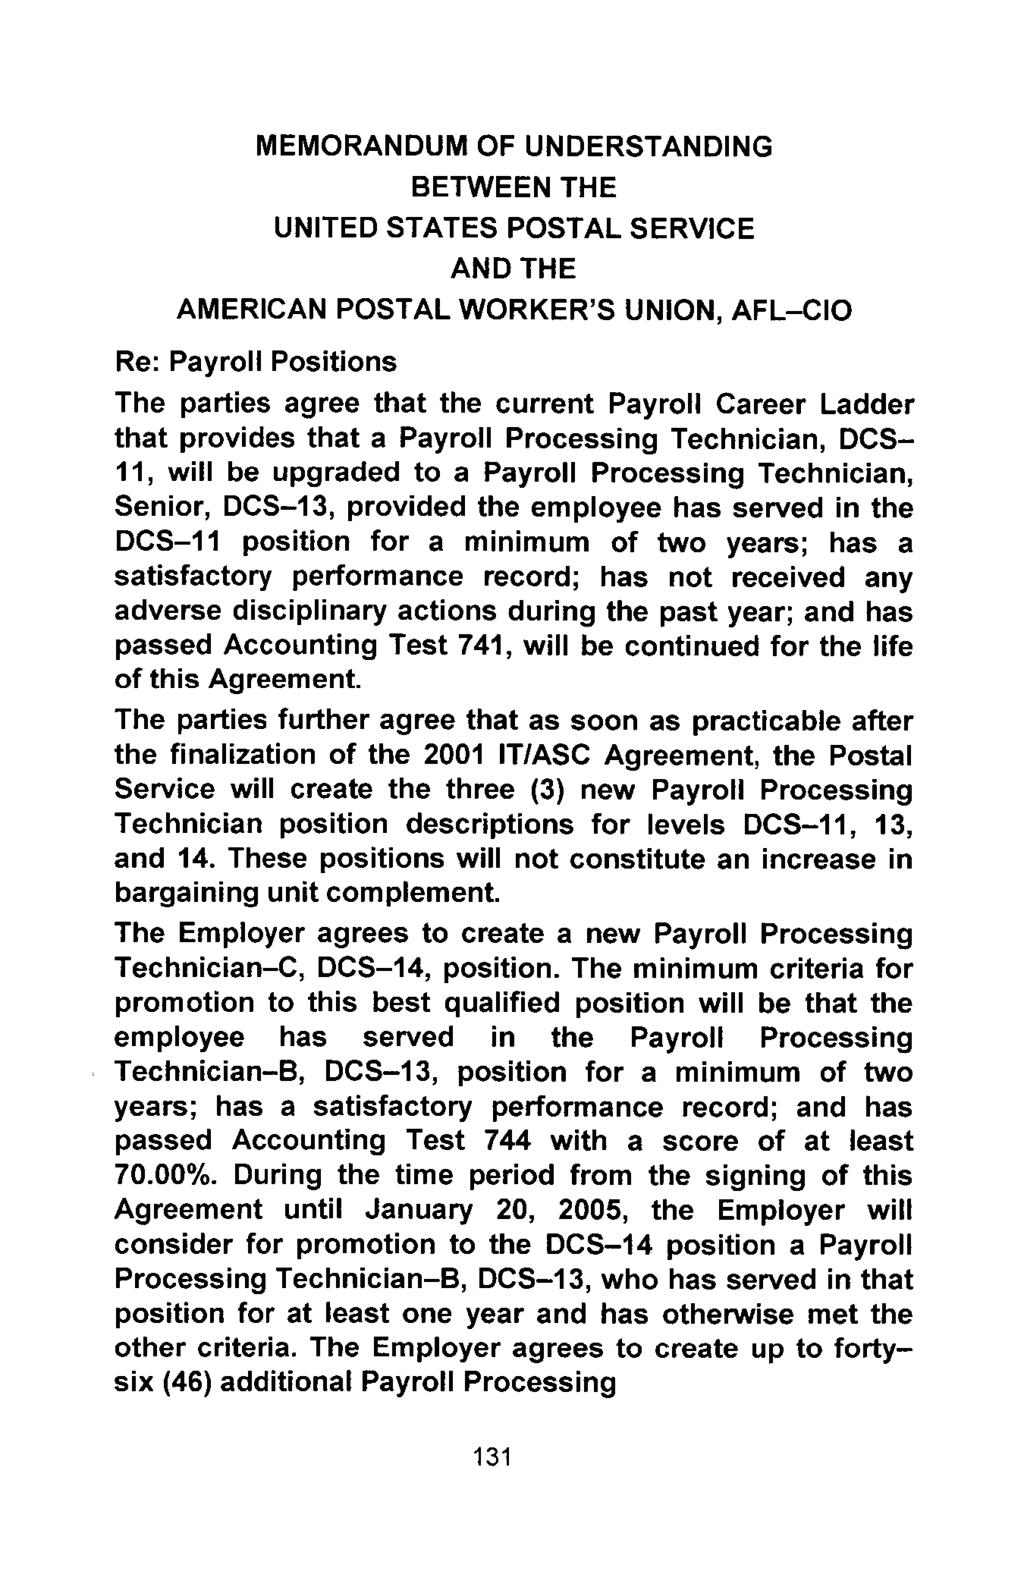 MEMORANDUM OF UNDERSTANDING BETWEEN THE UNITED STATES POSTAL SERVICE AND THE AMERICAN POSTAL WORKER'S UNION, AFL-CIO Re : Payroll Positions The parties agree that the current Payroll Career Ladder